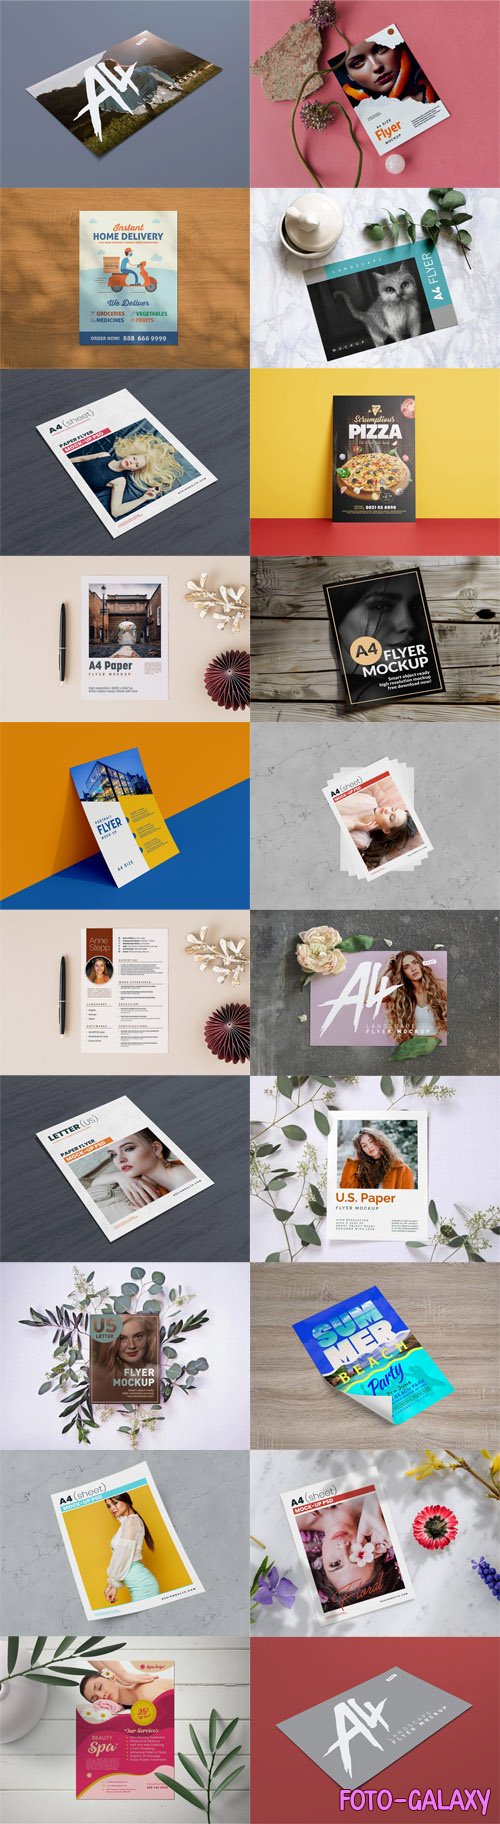 Awesome A4 Flyers PSD Mockups Templates Collection